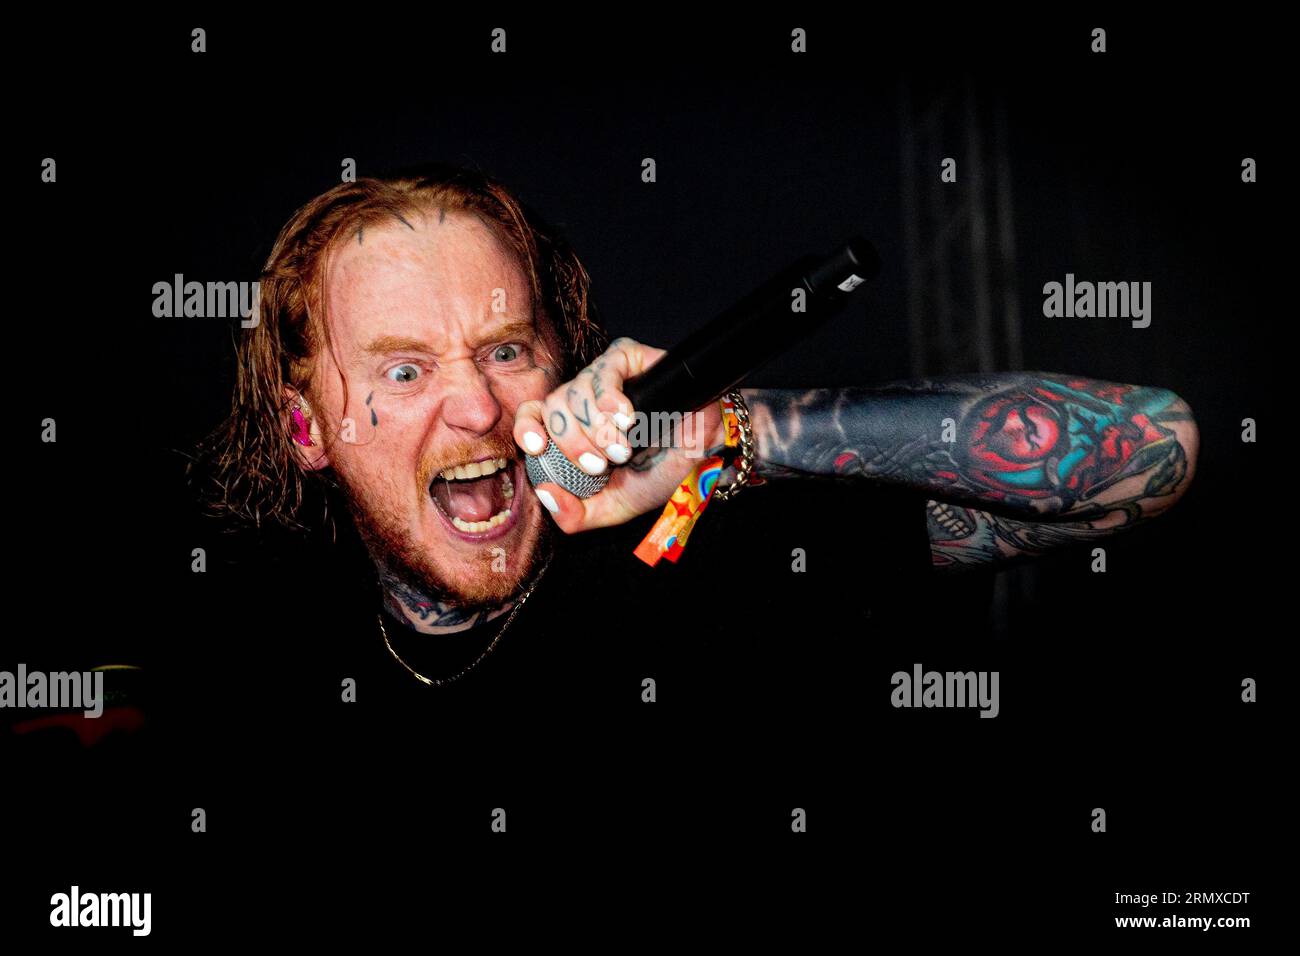 Hungary 13 August 2023 Frank Carter and the Rattlesnakes live at Sziget Festival Budapest © Andrea Ripamonti / Alamy Stock Photo